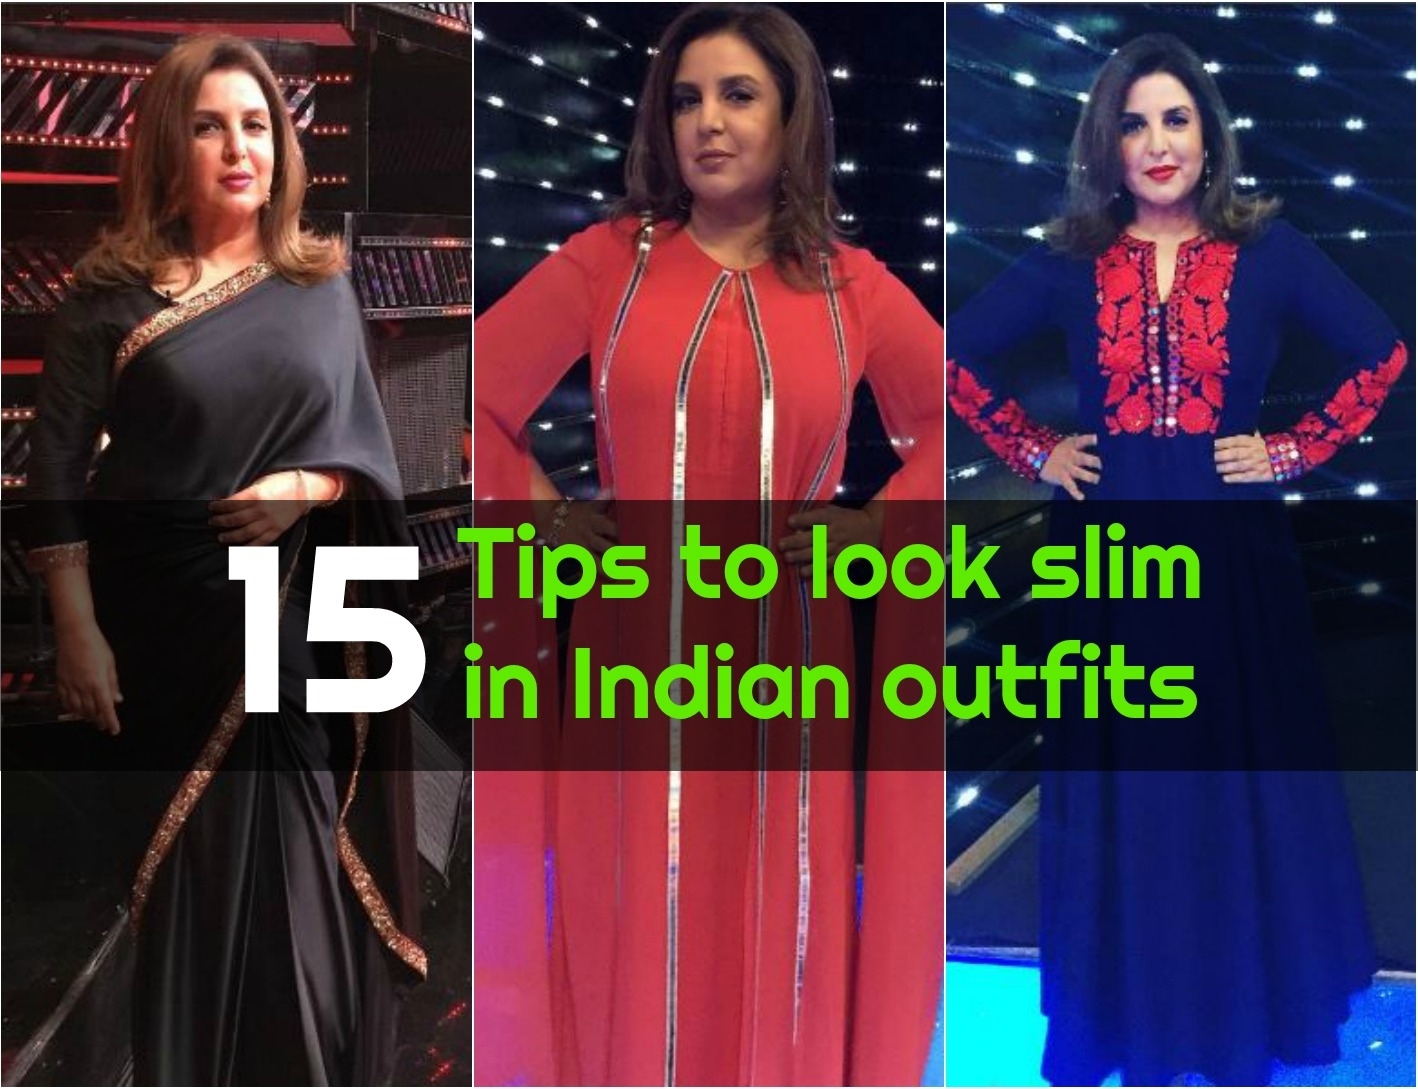 15 Tips To Look Slim In Indian Outfits - Makeup And Body Blog inside Indian Hairstyle To Look Slim